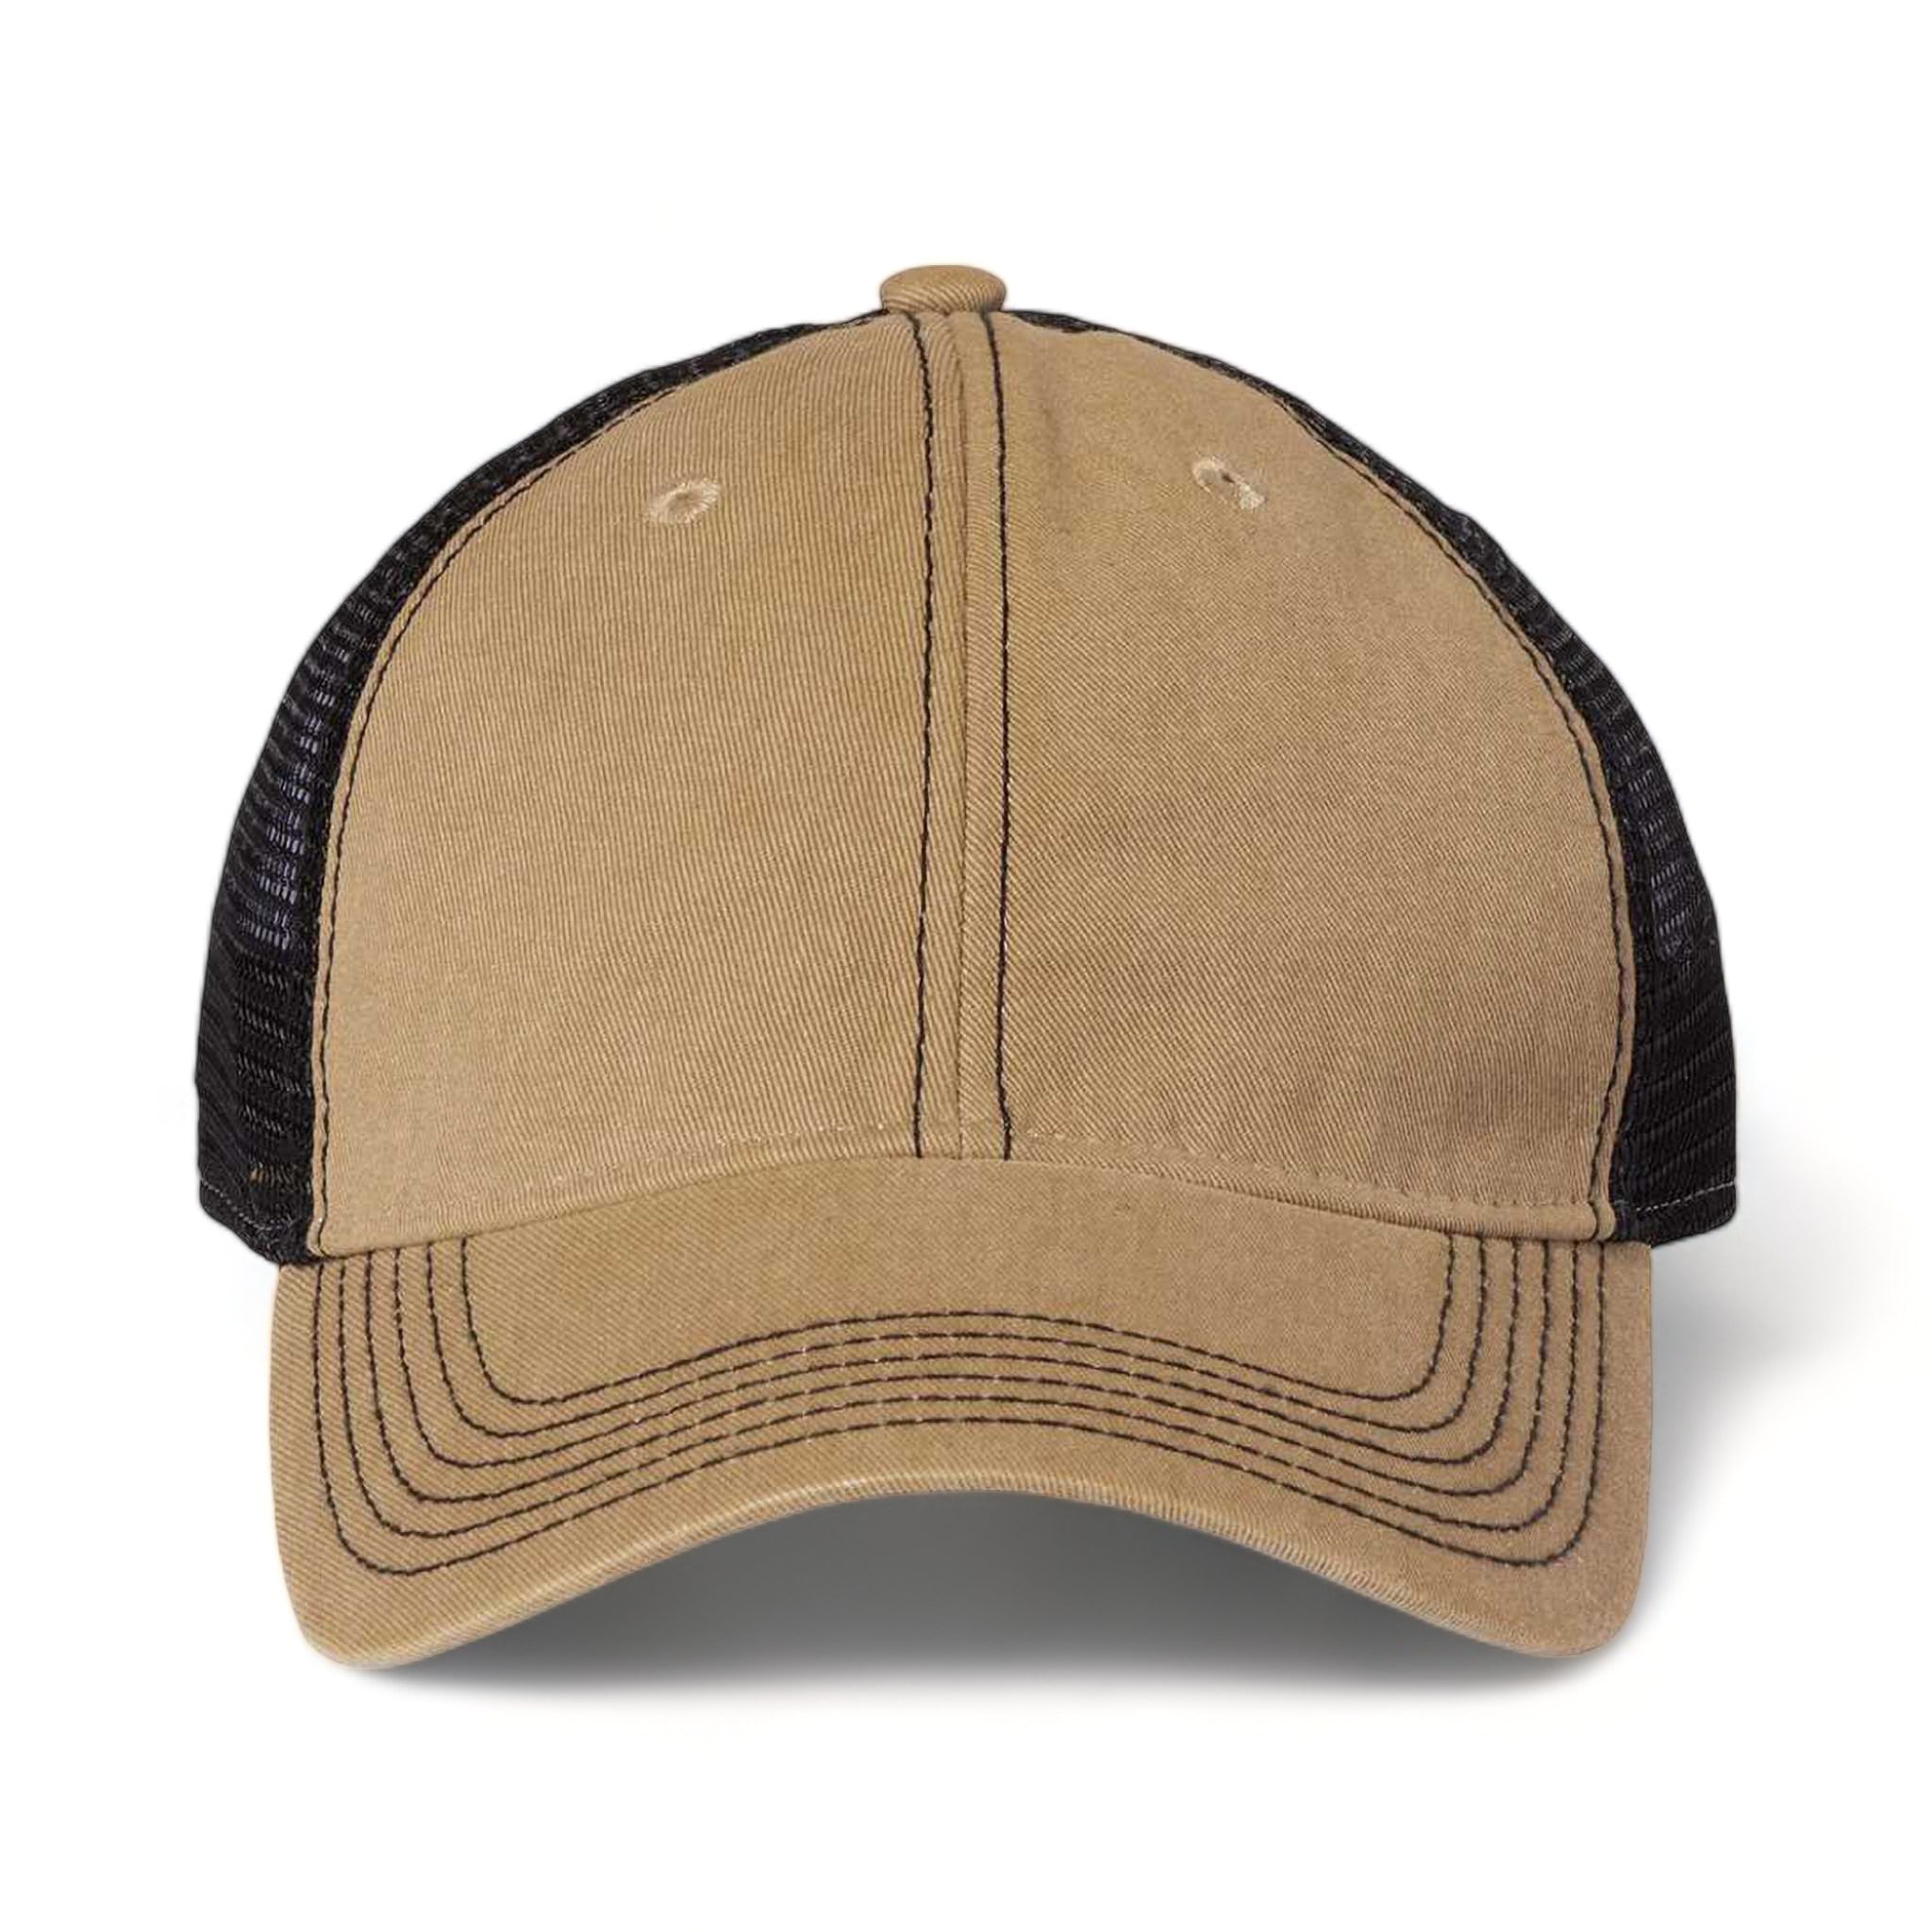 Front view of LEGACY OFA custom hat in khaki and black